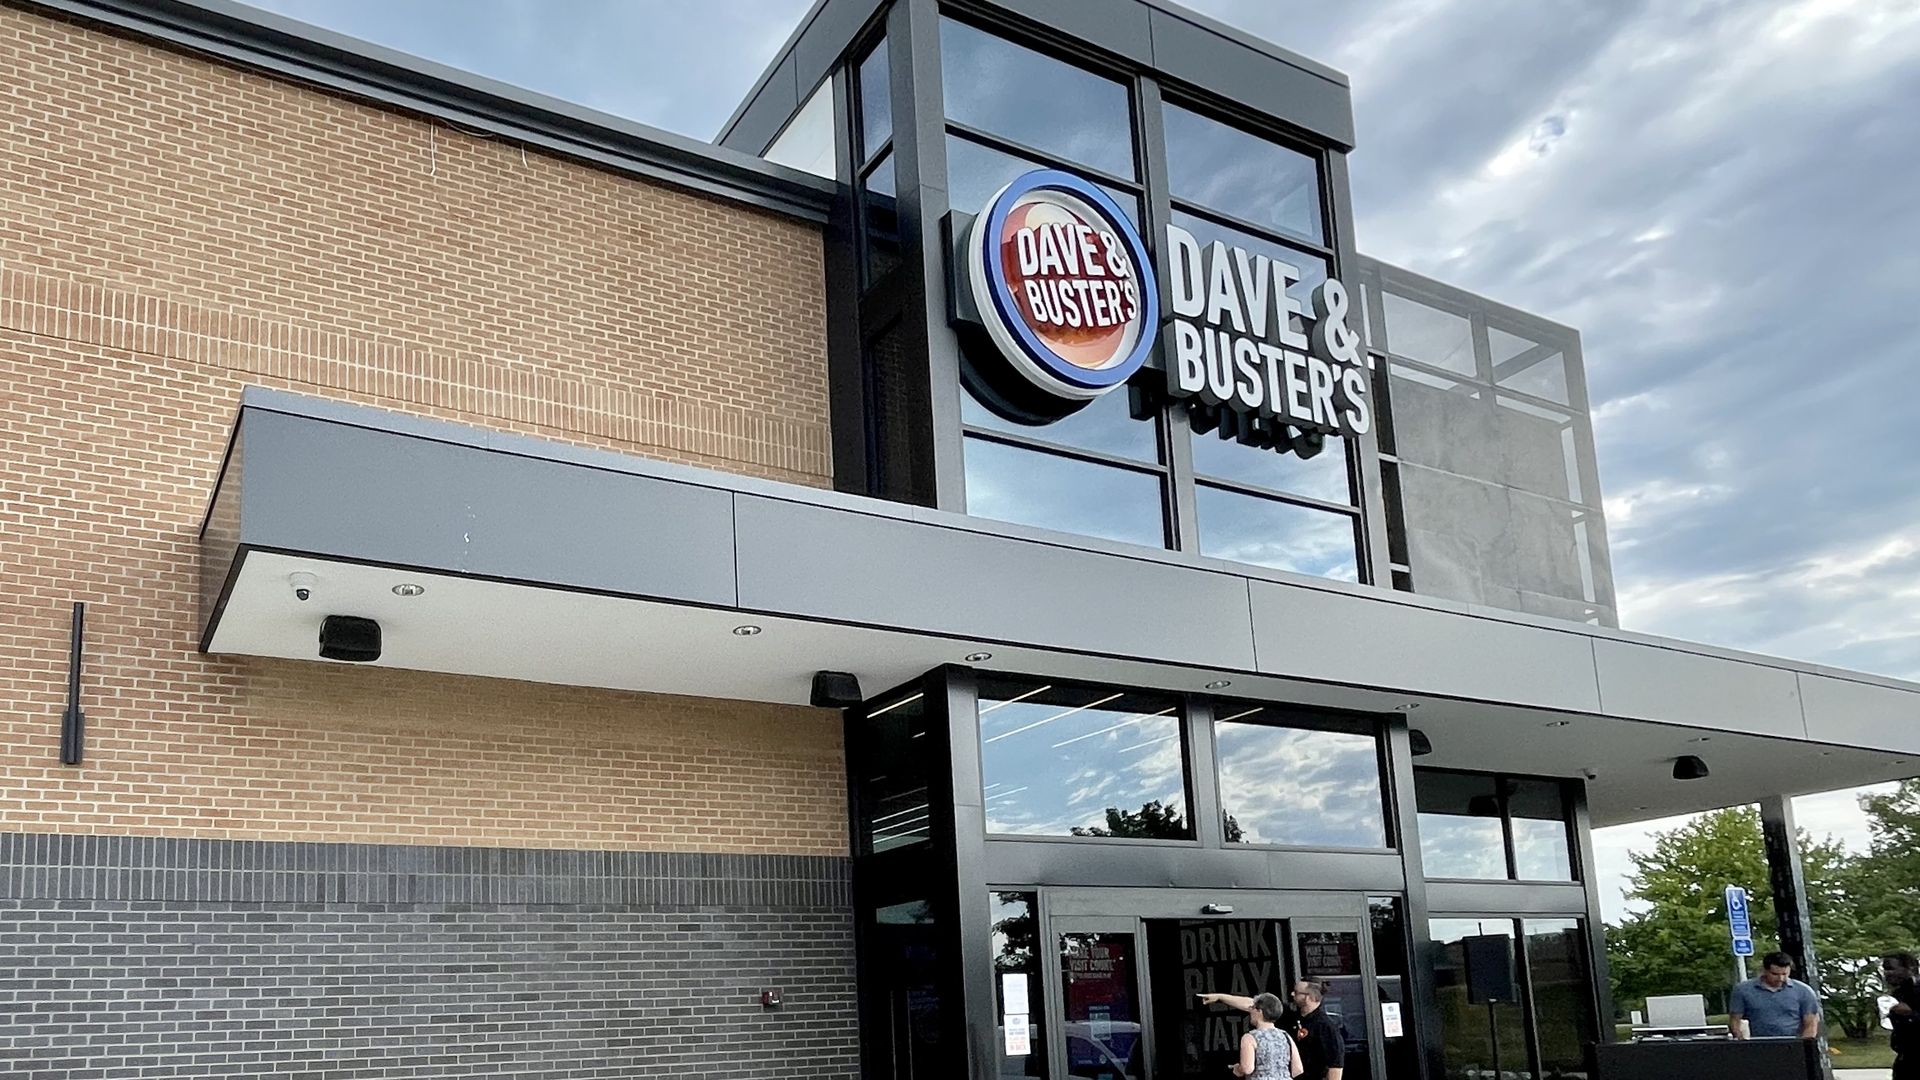 Iowa's first Dave & Buster's opens Monday in West Des Moines